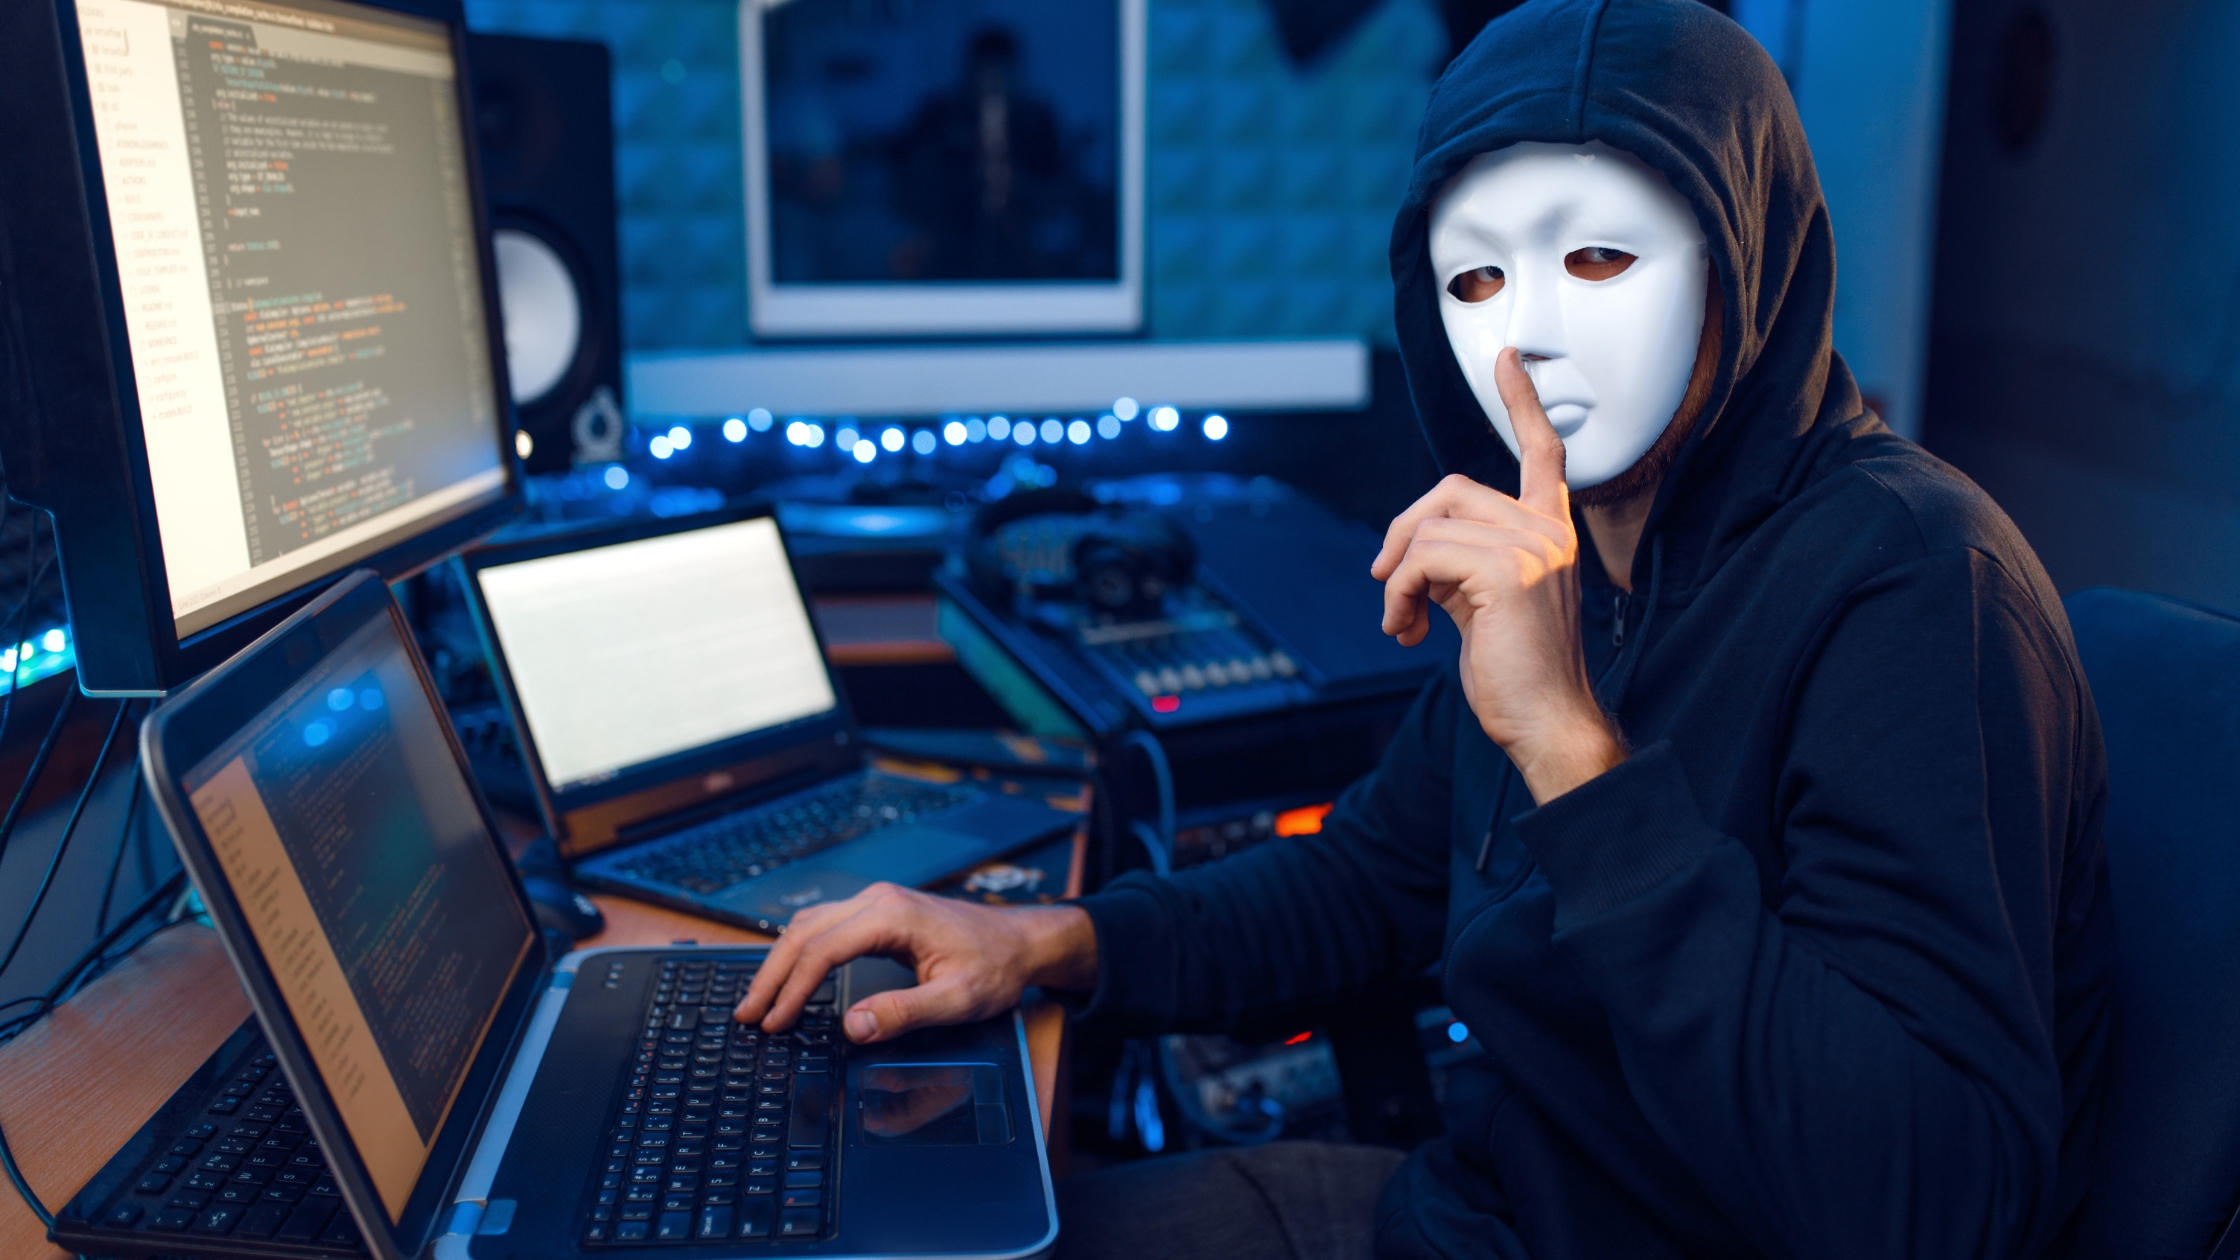 Website hacker wearing white mask and all black at computers on a desk